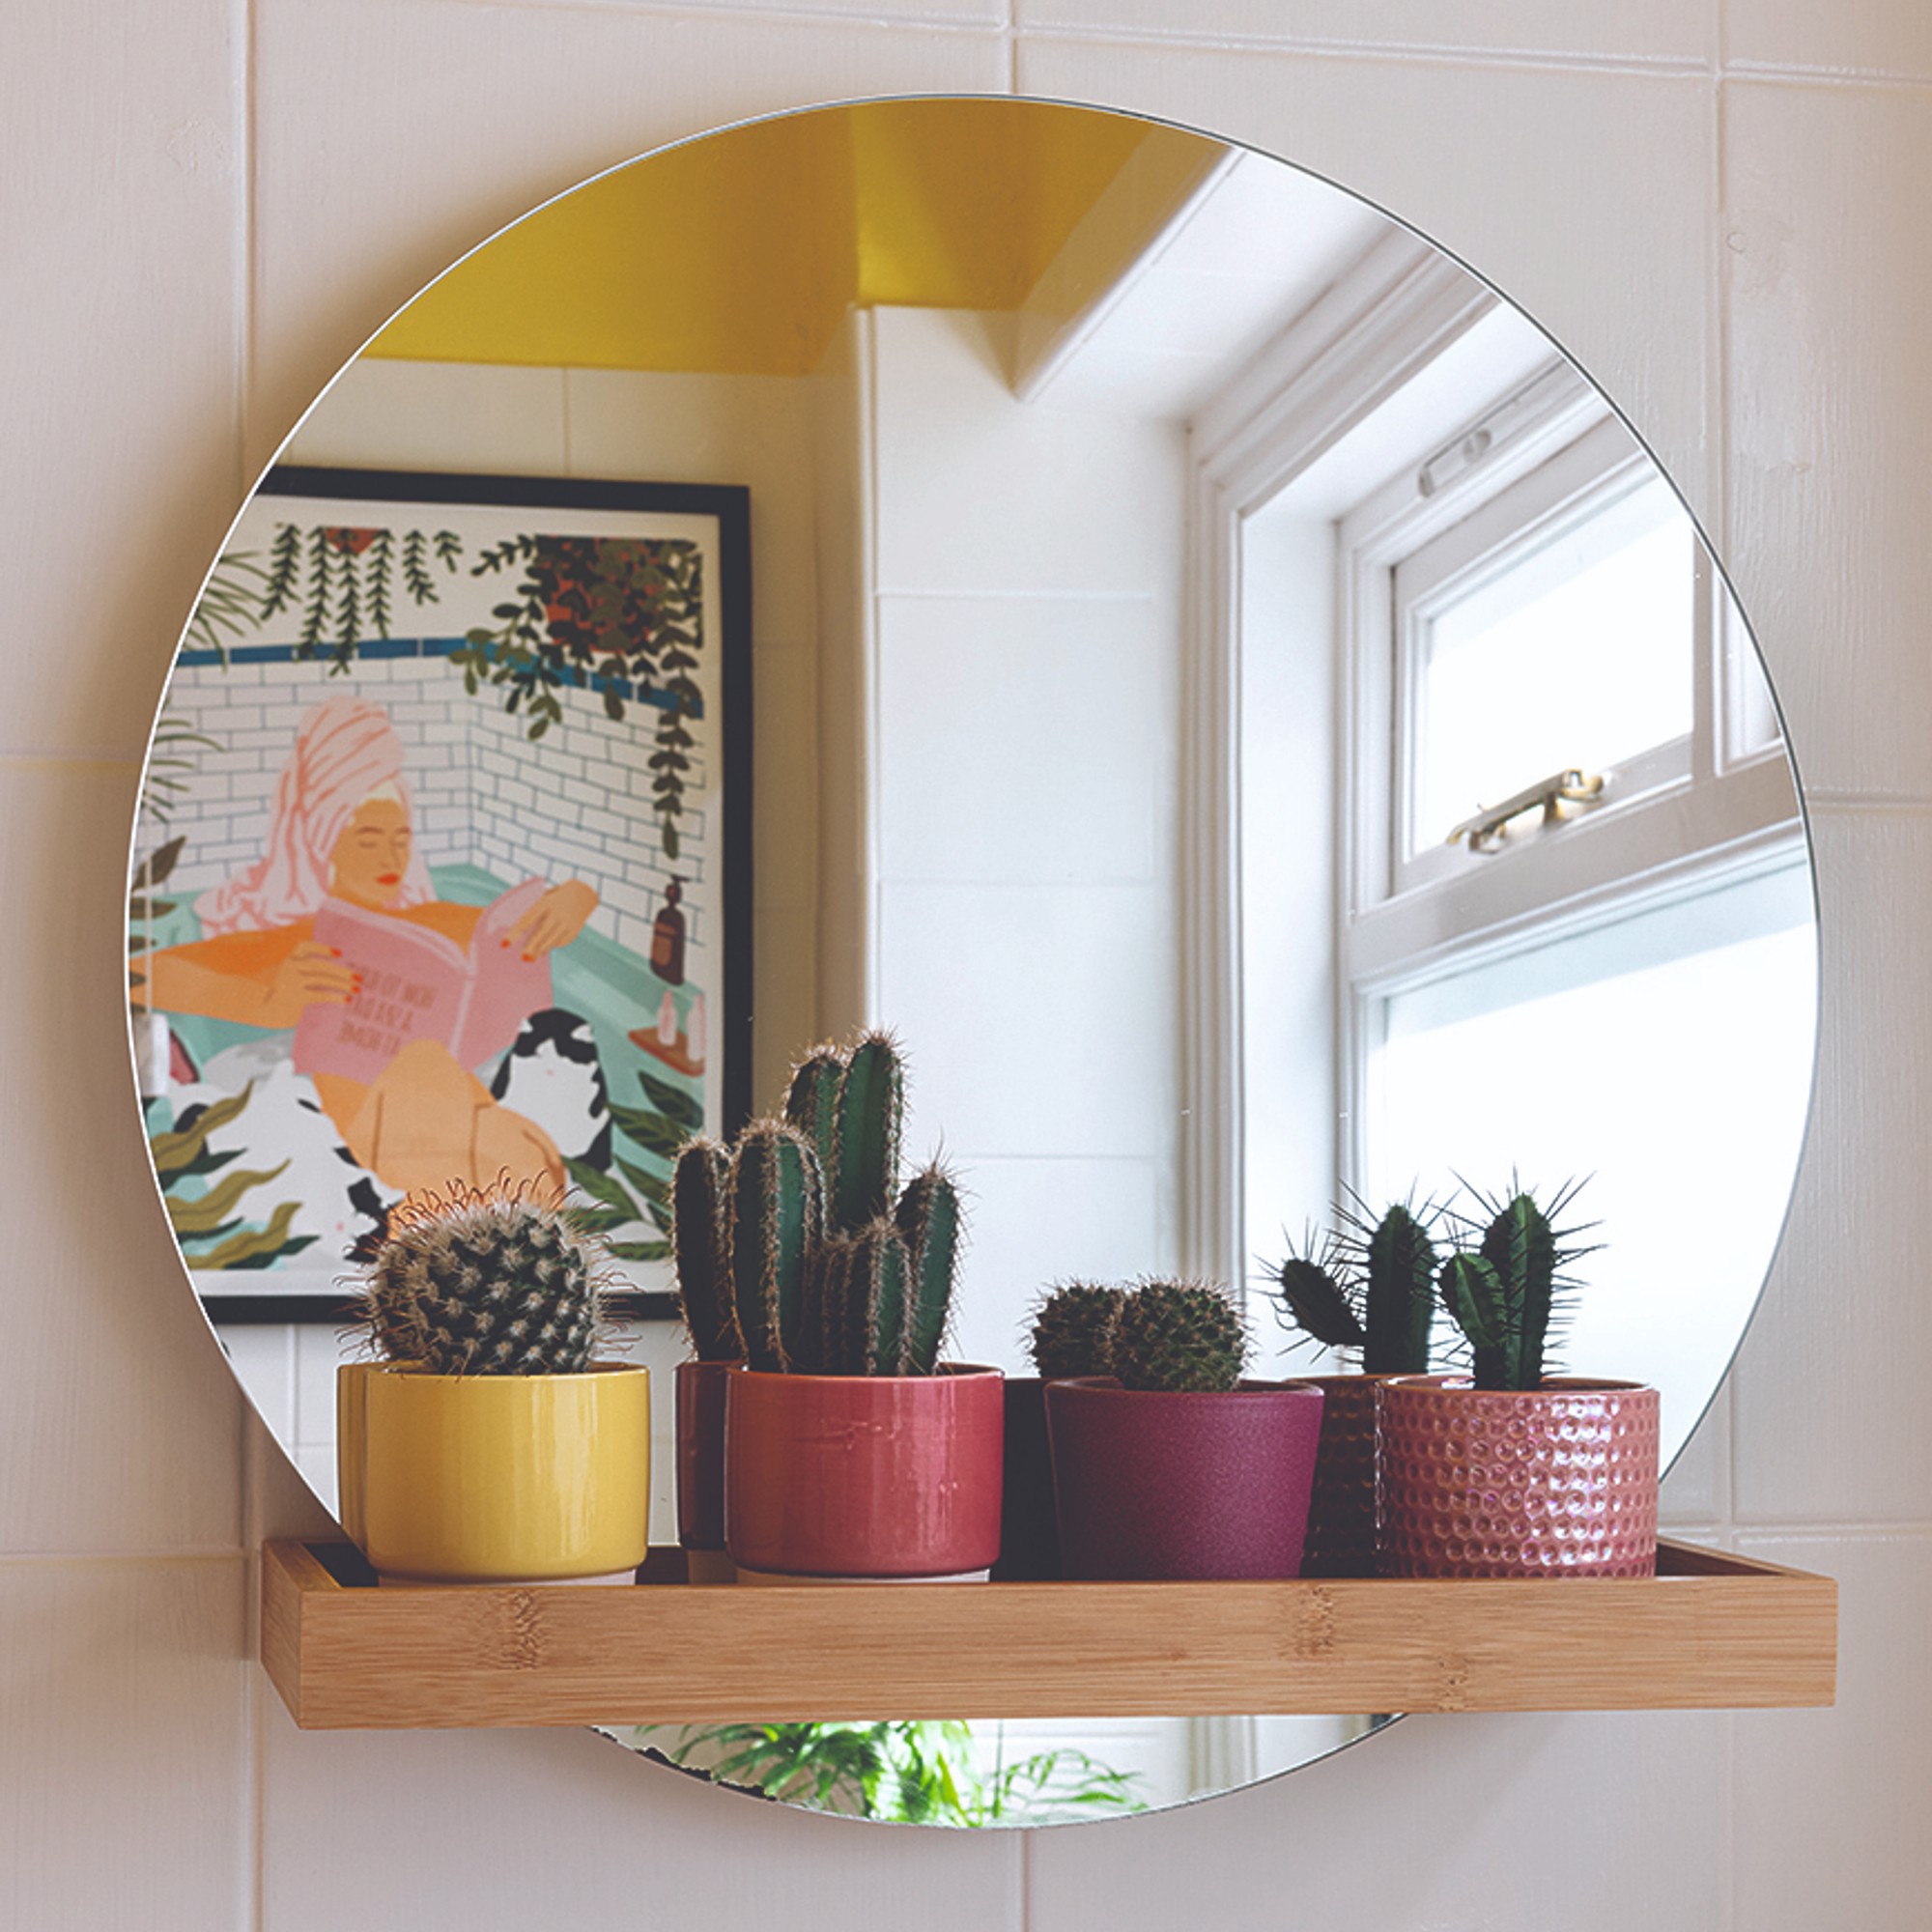 A mirror shelf in the bathroom with cacti